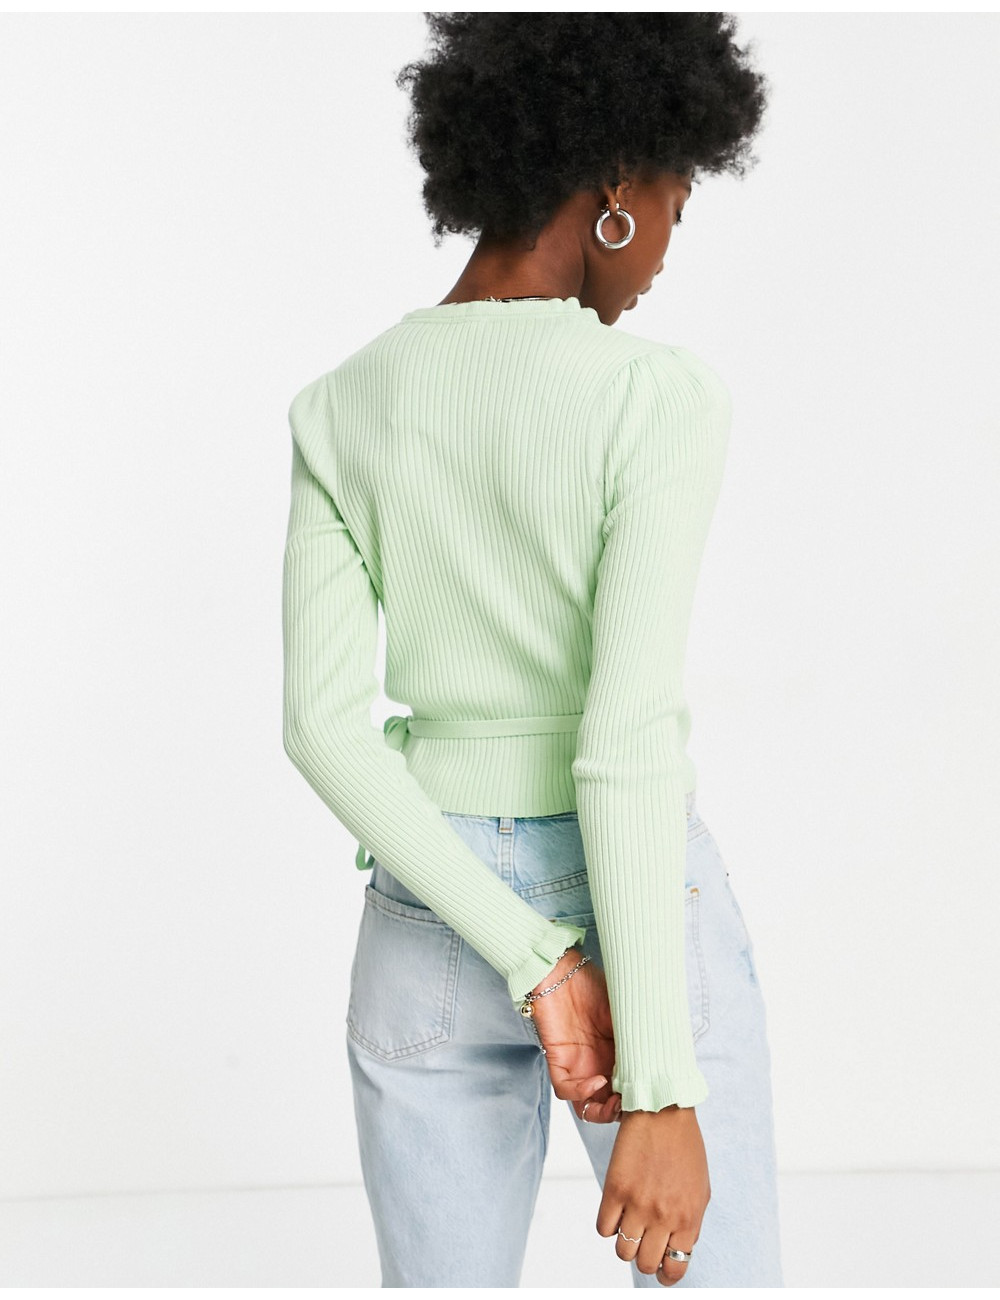 Pimkie wrap top in green